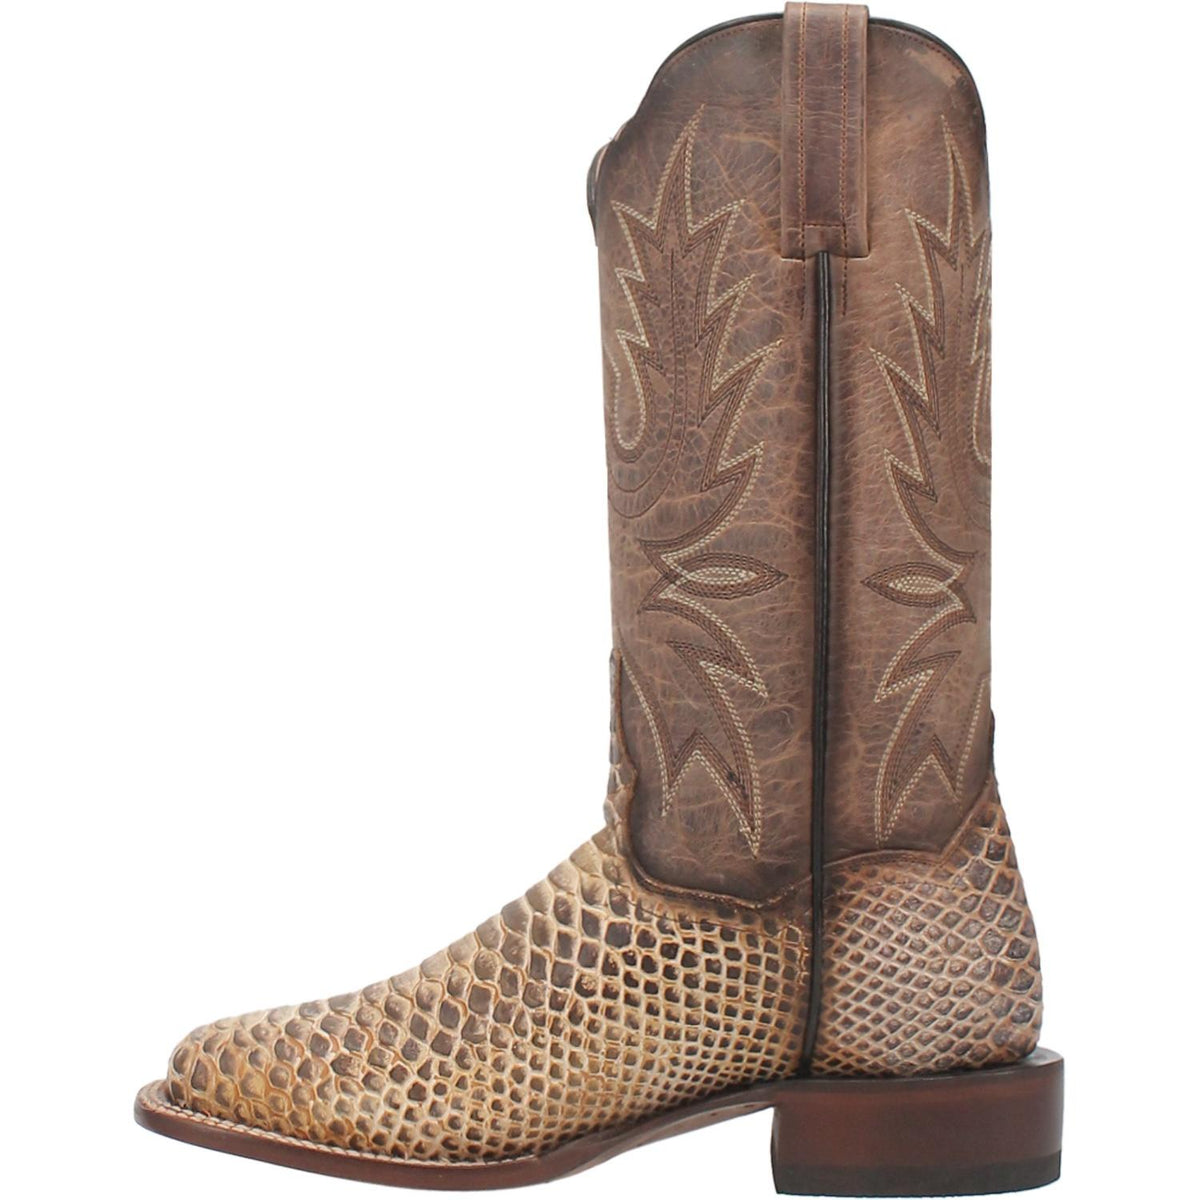 DEE FAUX PYTHONLEATHER BOOT Cover